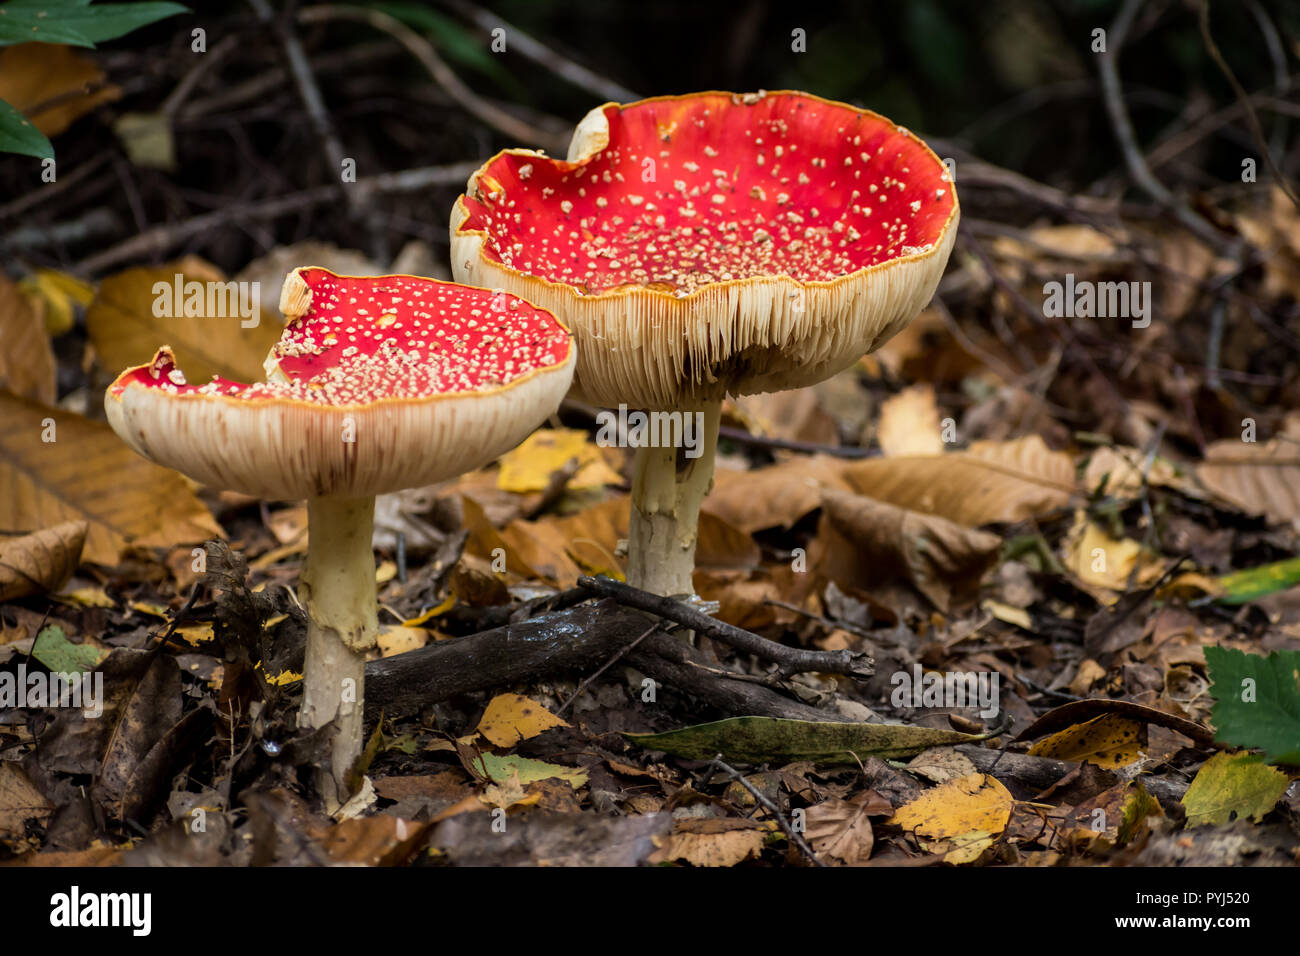 Two Amanita muscaria (fly agaric) mushrooms growing on a woodland floor in West Sussex, UK, surrounded by autumn leaves and twigs. Copy space included Stock Photo